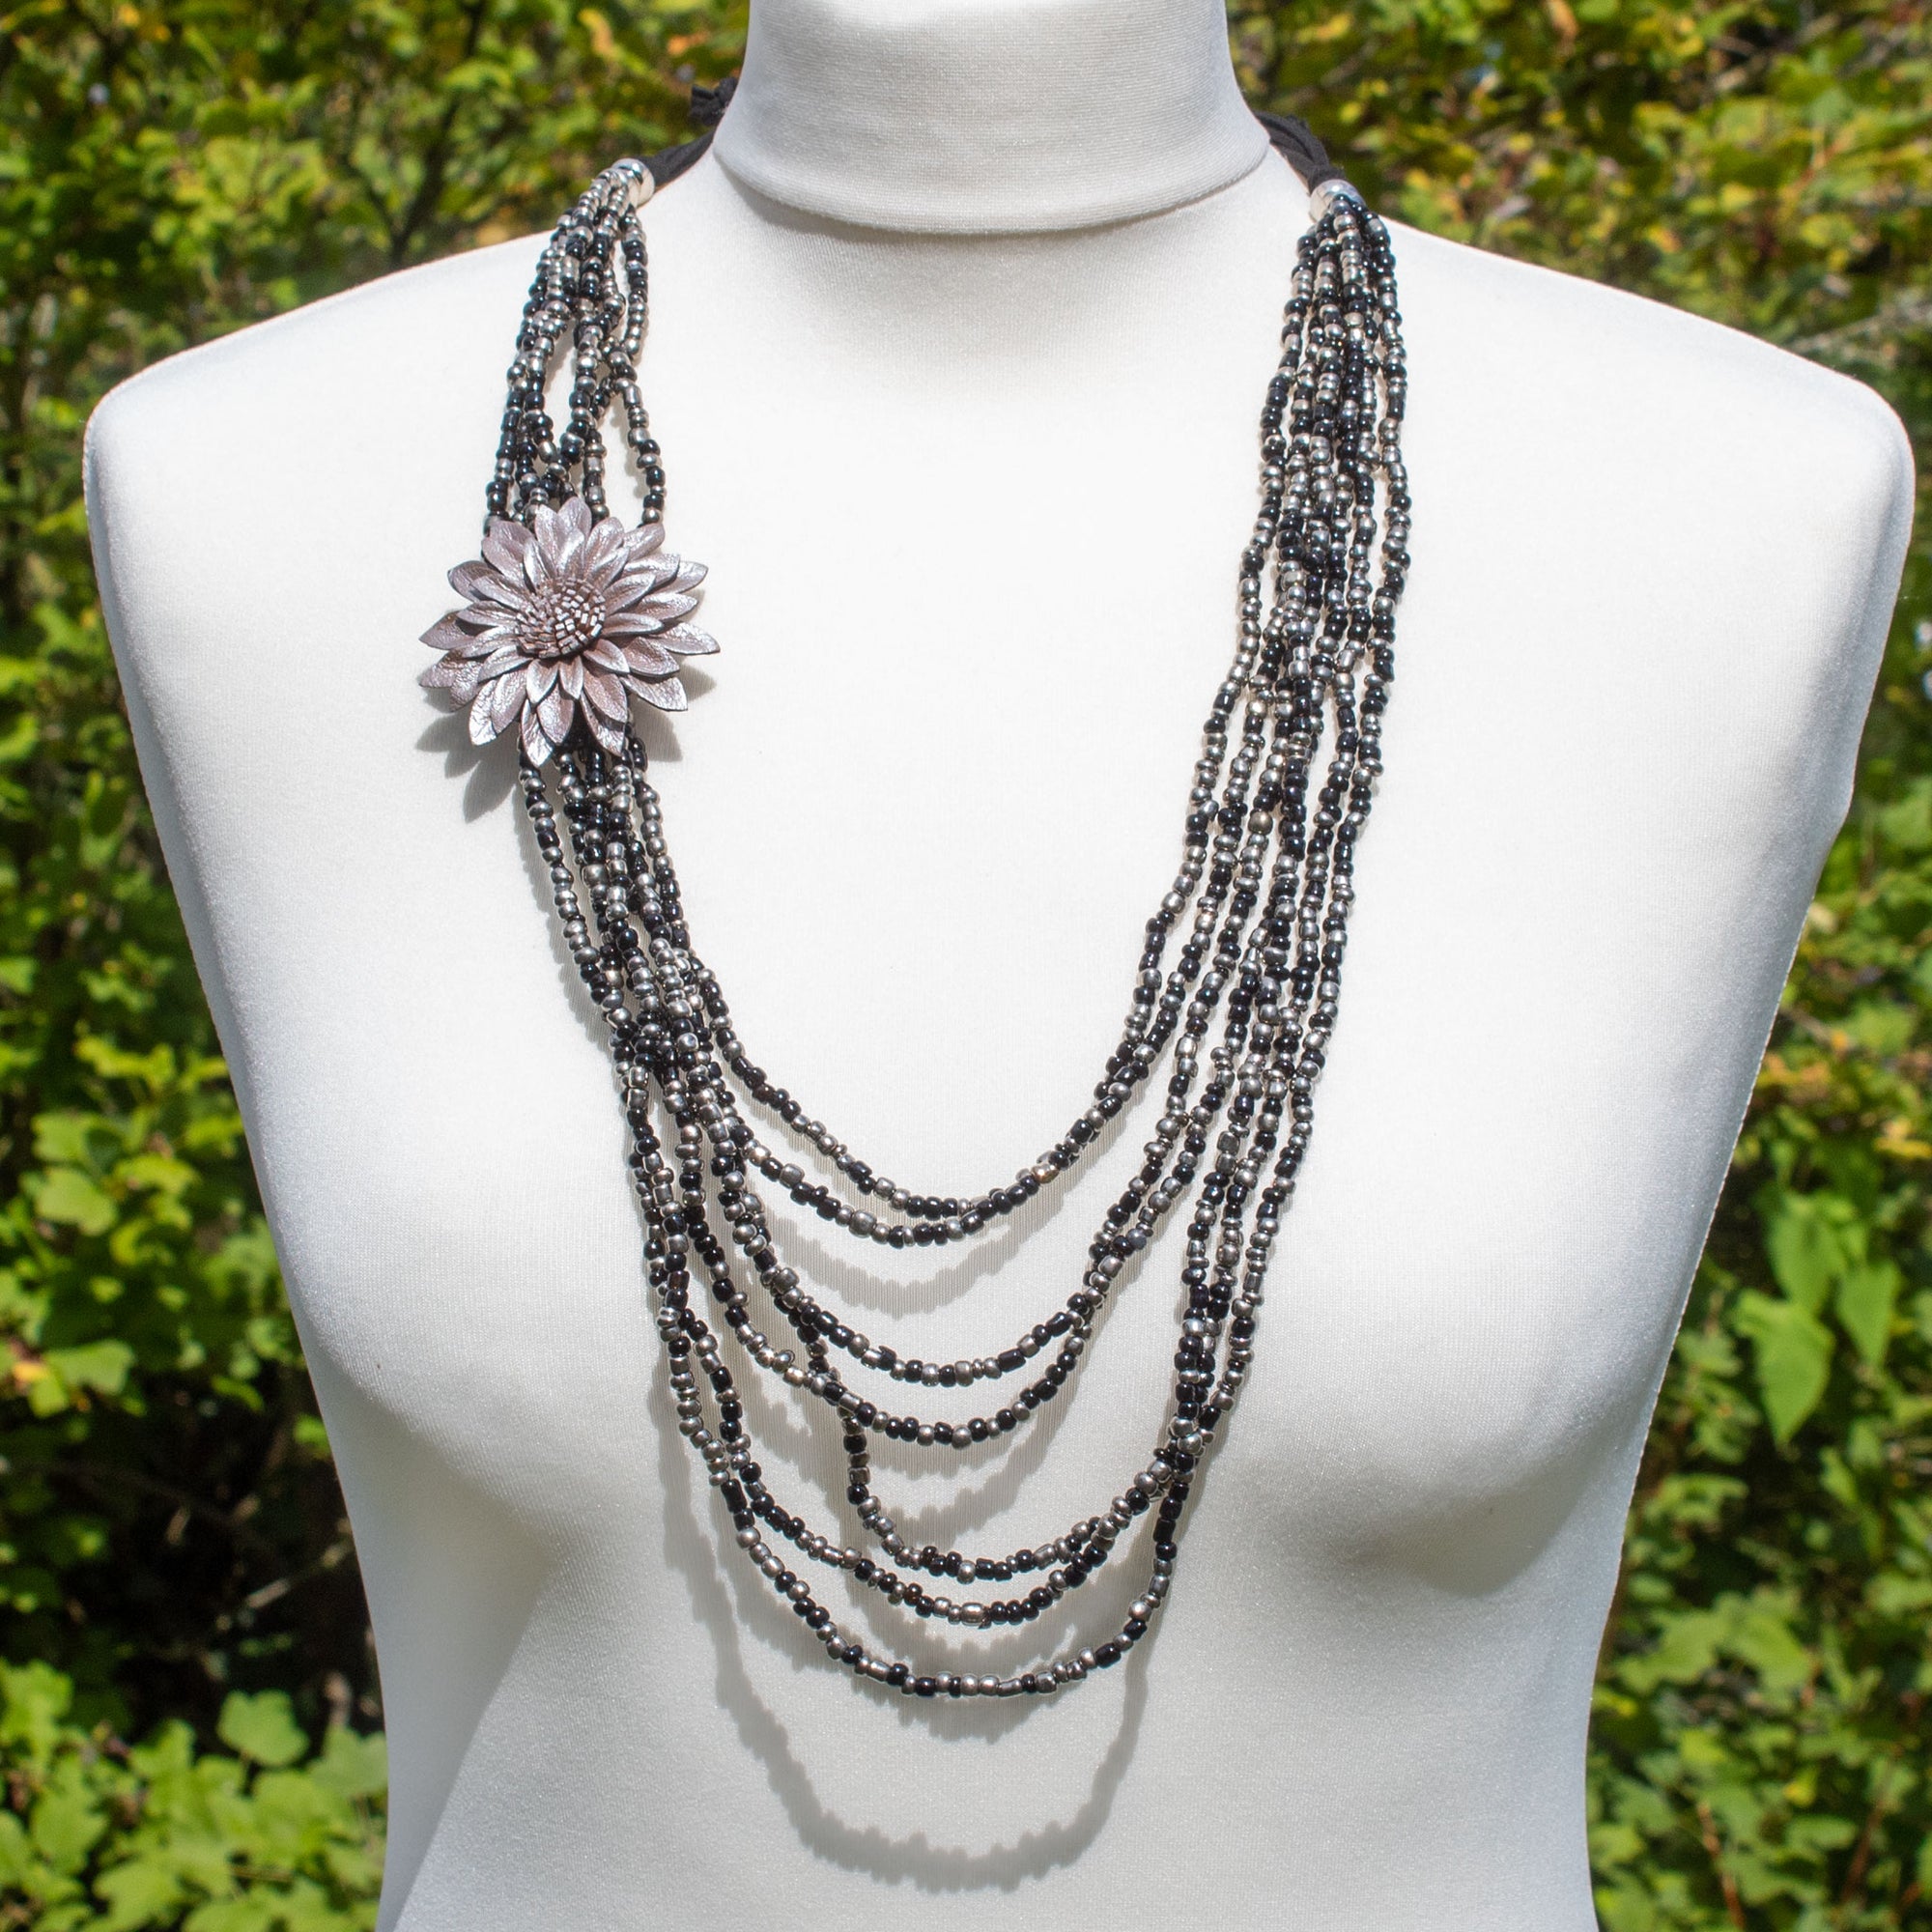 Multi-strand black & silver necklace with silver leather flower | Necklace - The Naughty Shrew